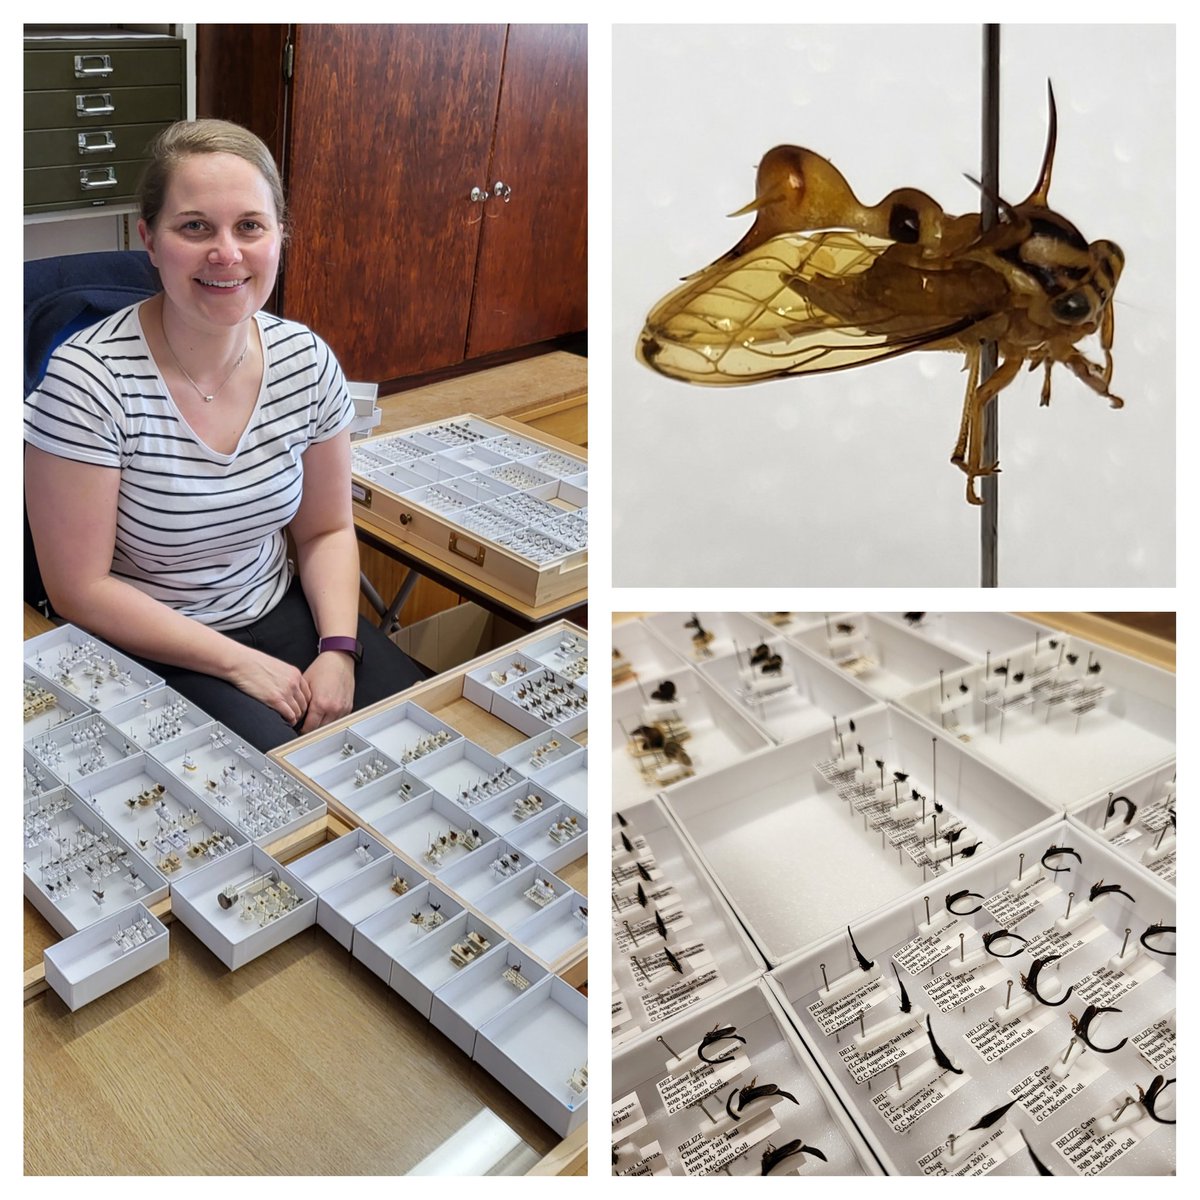 Great afternoon spent arranging some of the @morethanadodo Membracidae collection! Got to love an enquiry led collections sort out session 🙂